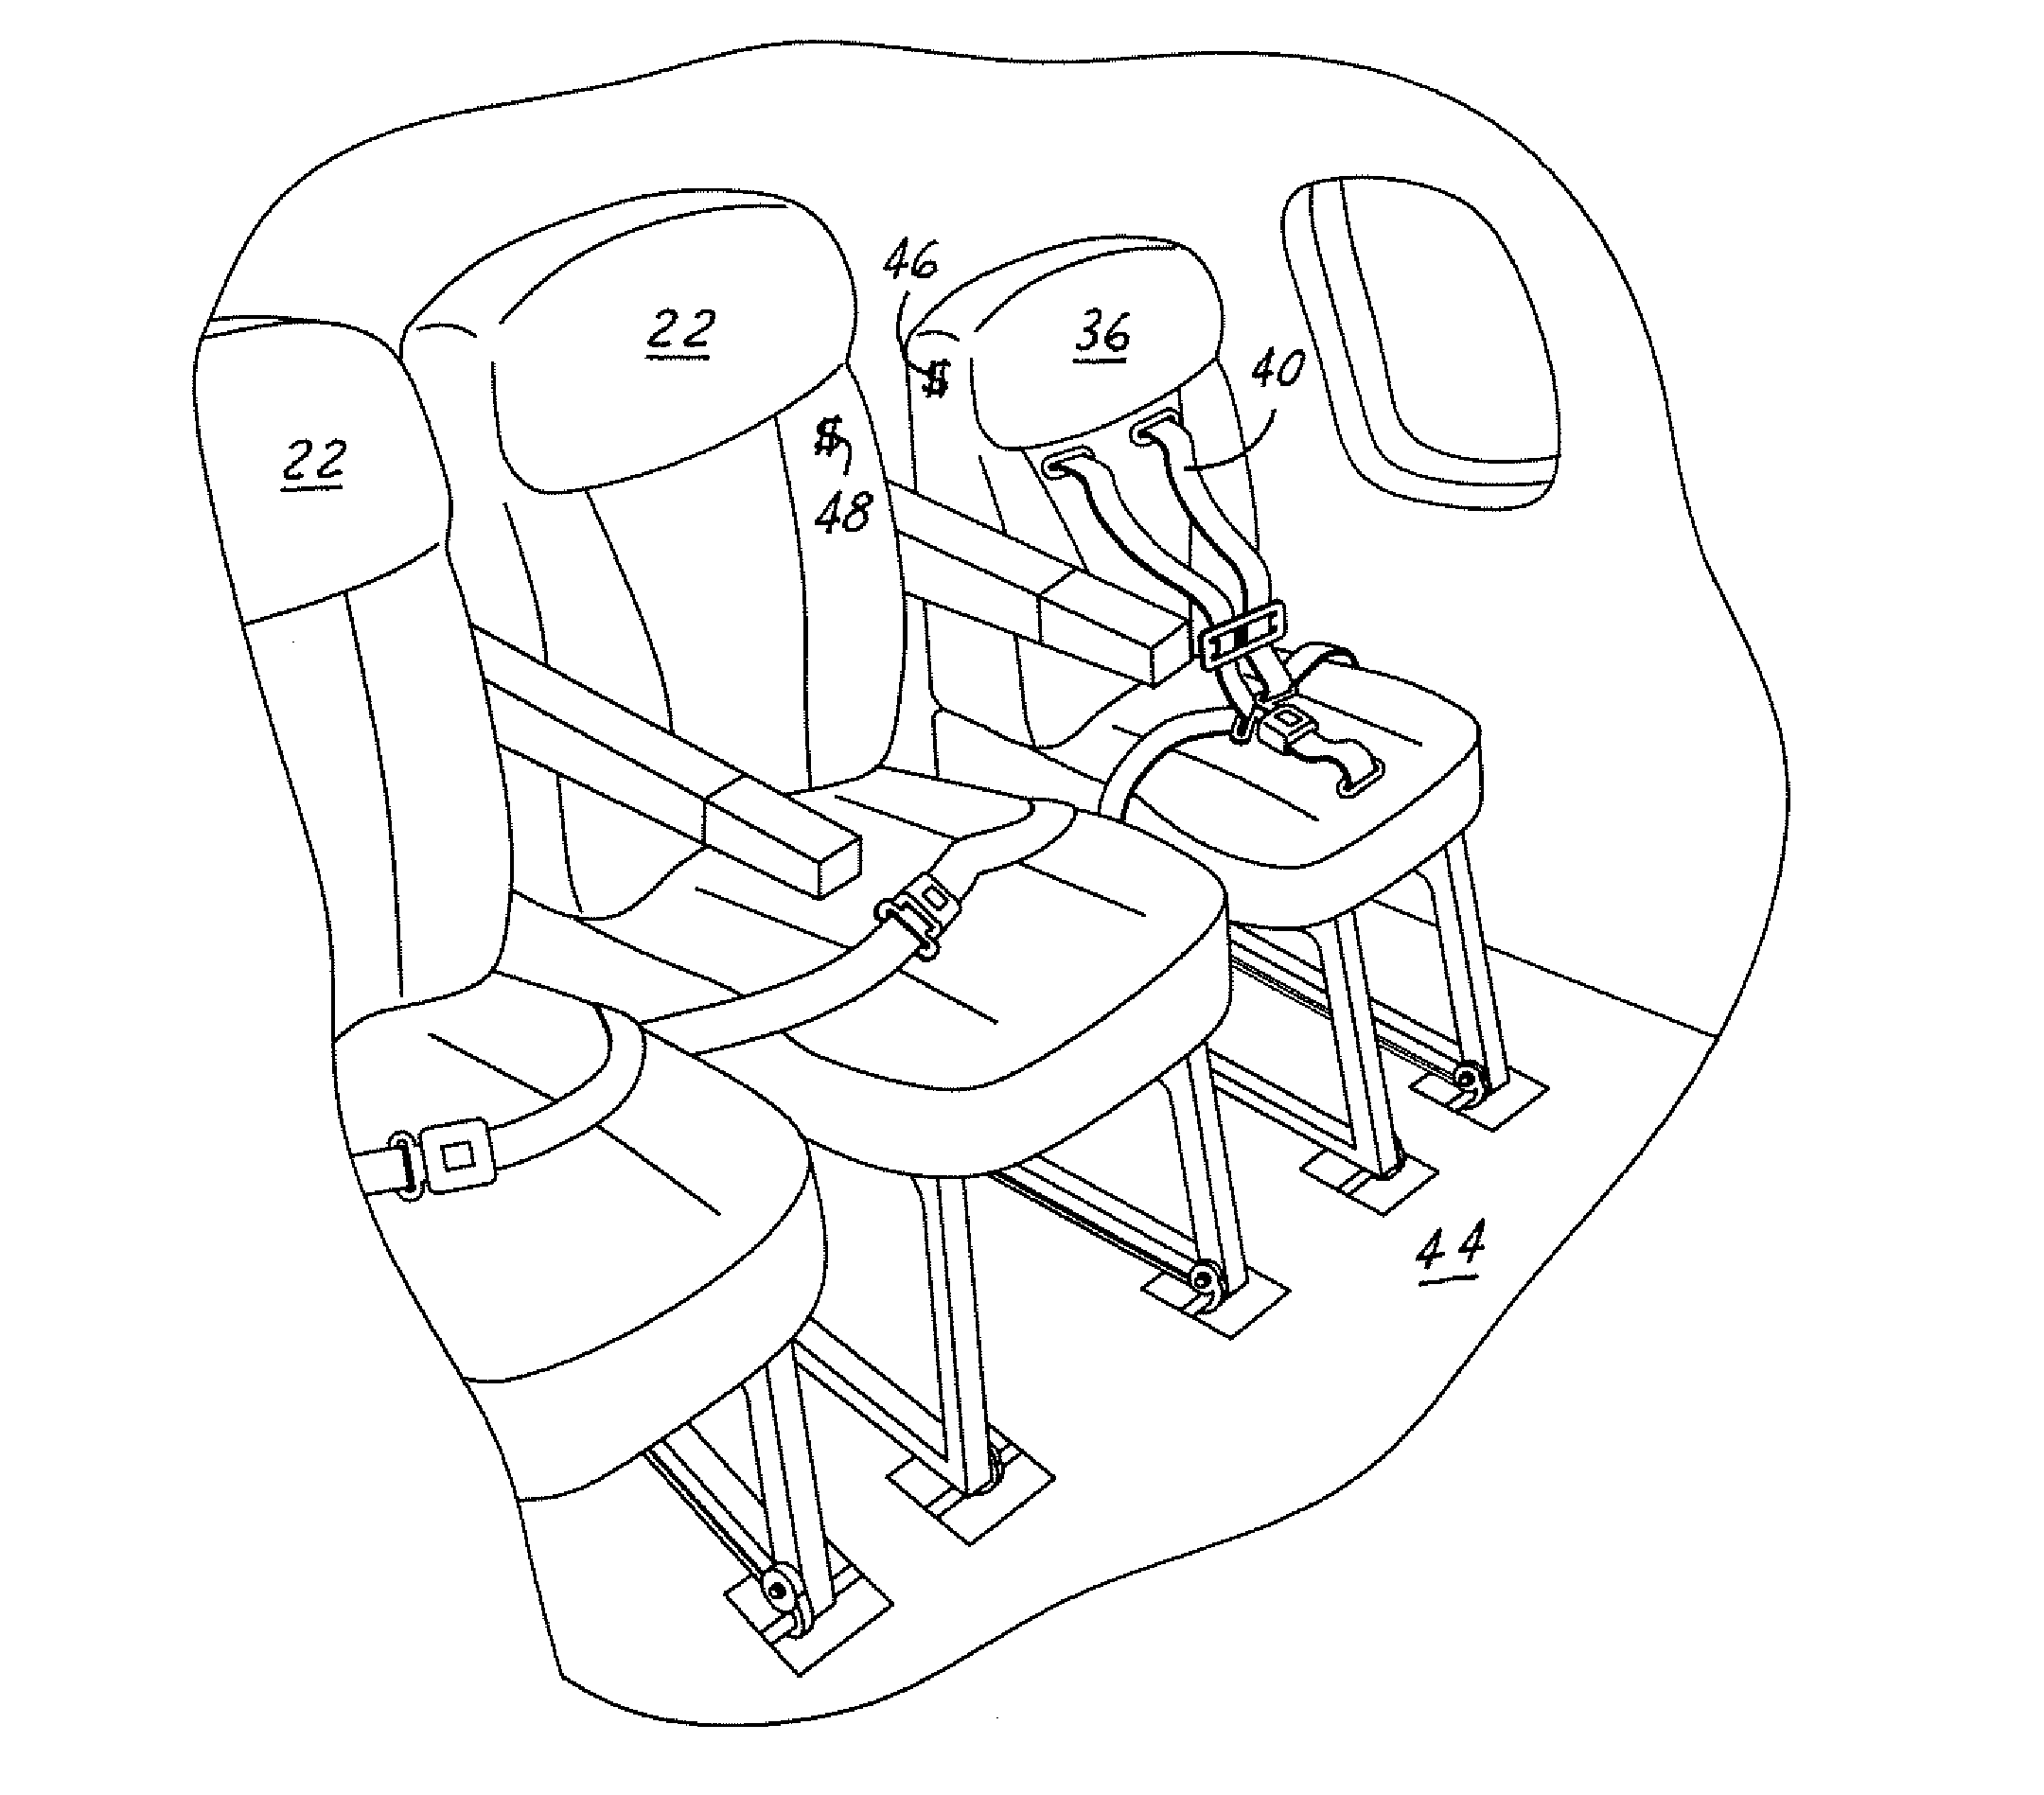 Aircraft youth seat/family seating arrangement